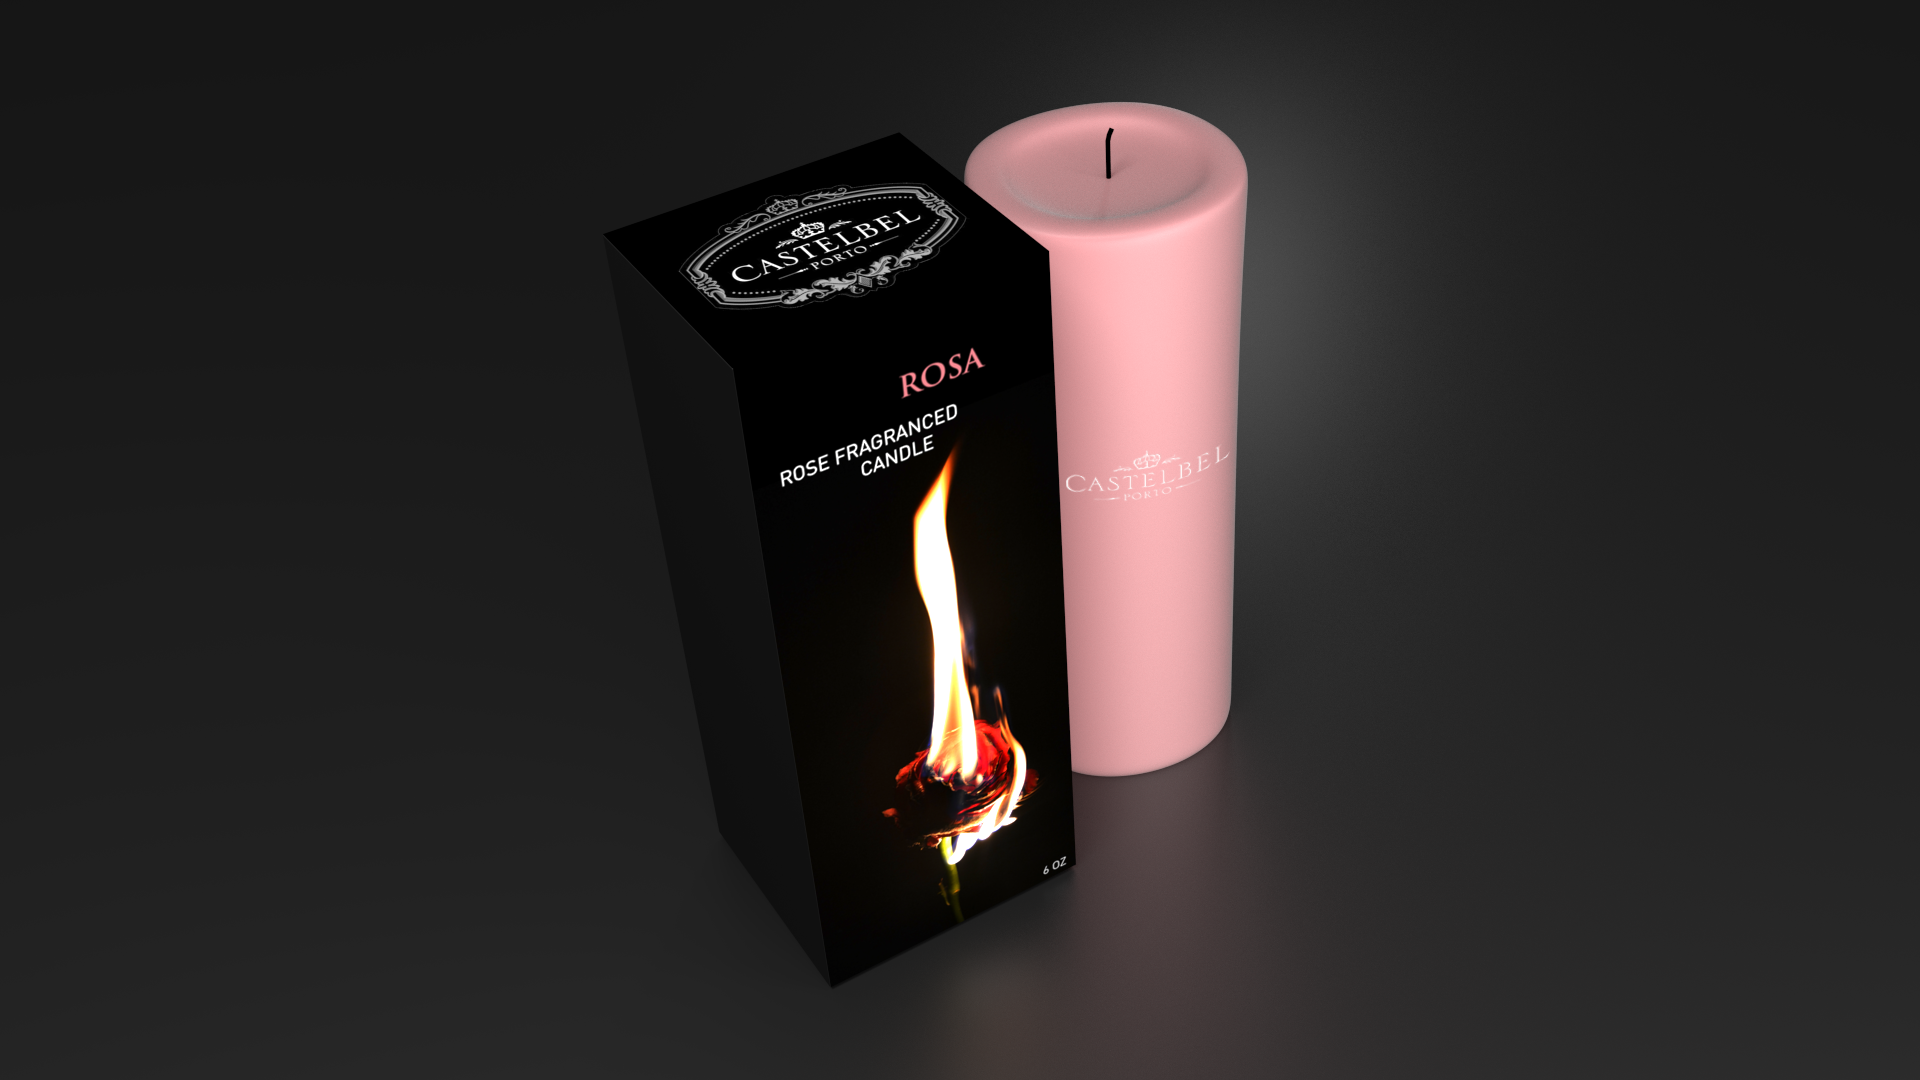 package candle Castelbel scent rose fire burn Pack Fragrance smell flame bl...